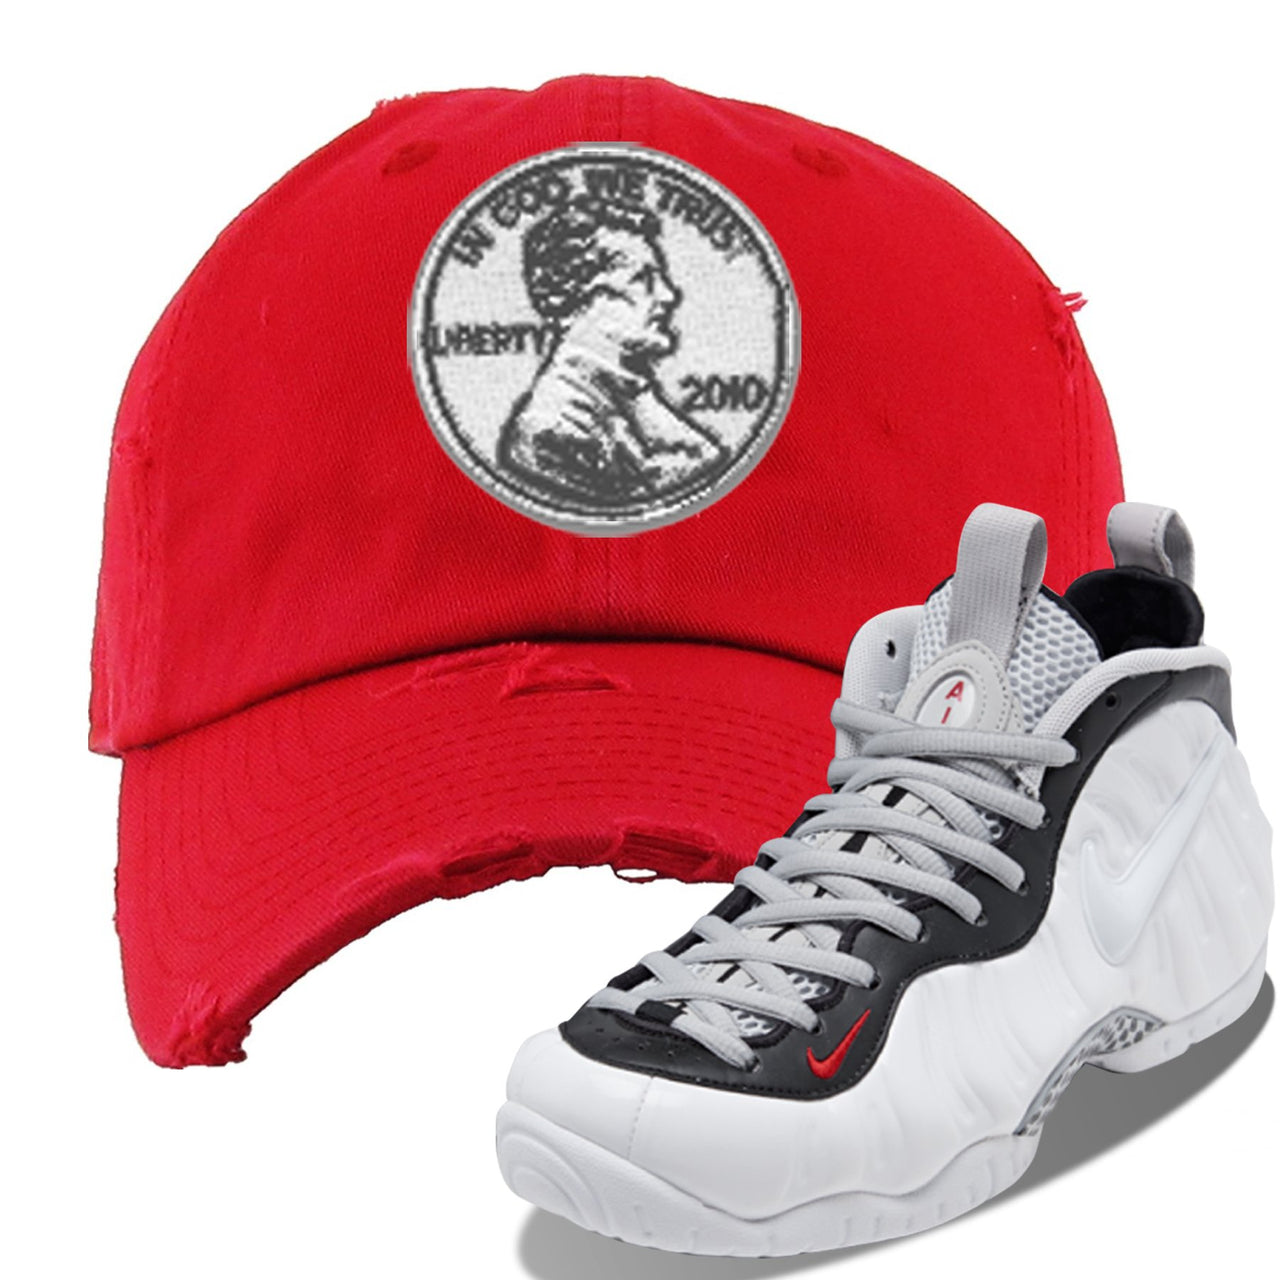 Foamposite Pro White Black University Red Sneaker Red Distressed Dad Hat | Hat to match Nike Air Foamposite Pro White Black University Red Shoes | Penny